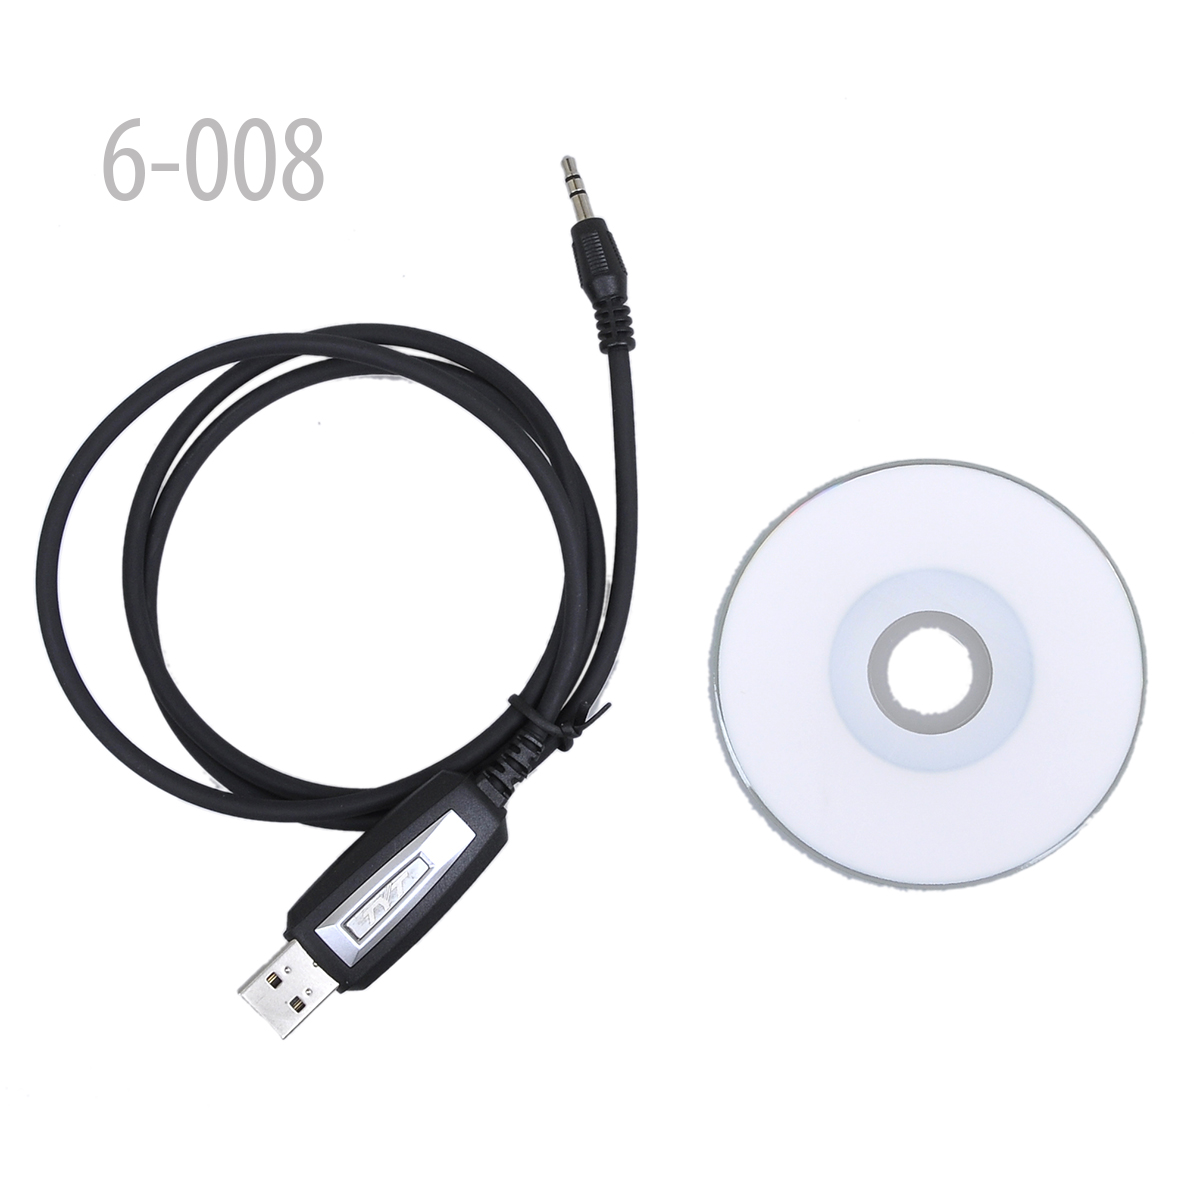 USB programming cable for TYT TH-9000